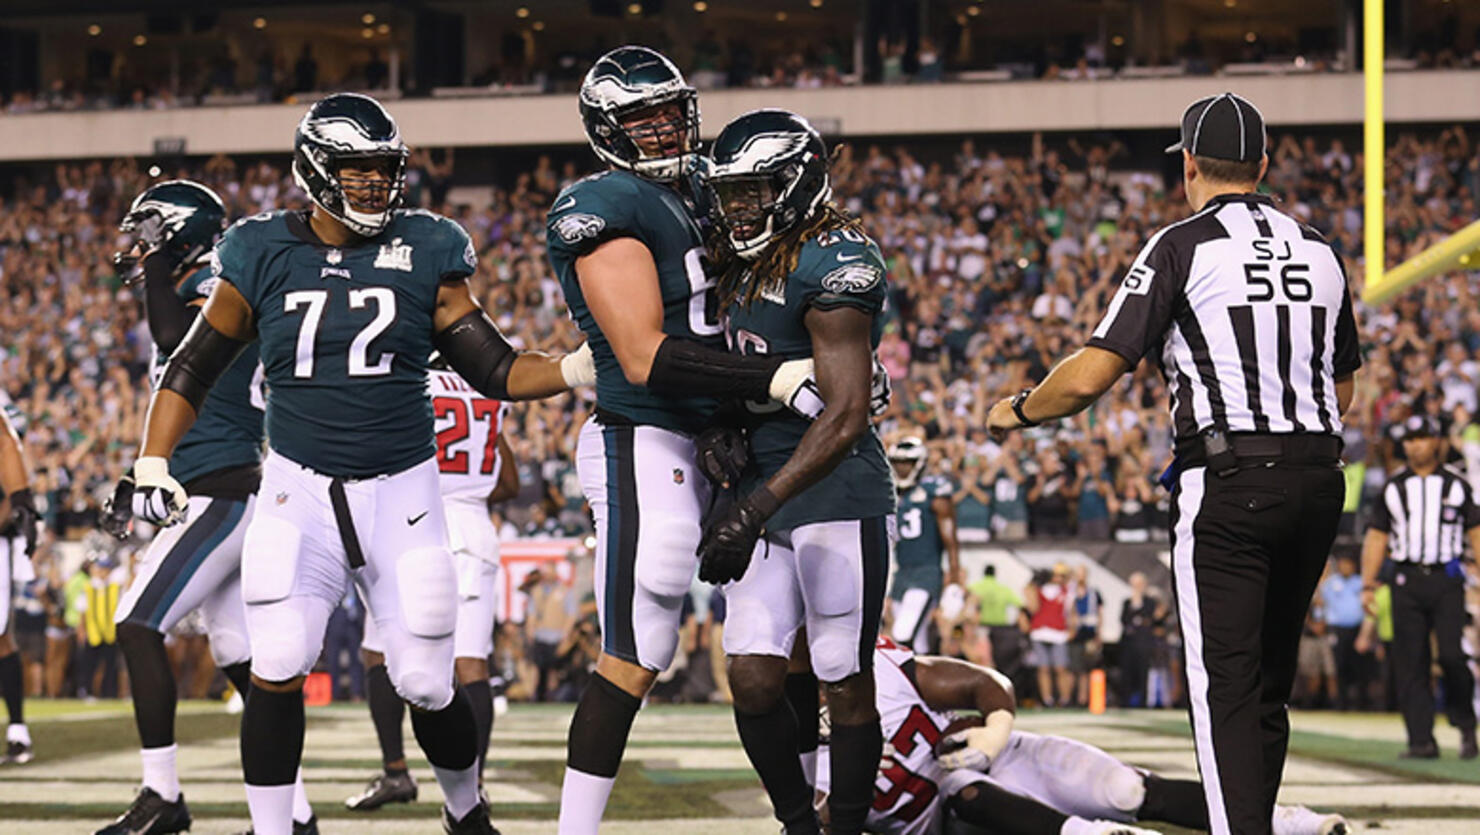 Lane Johnson #65 celebrates a two point conversion by Jay Ajayi #26 of the Philadelphia Eagles during the fourth quarter against the Atlanta Falcons at Lincoln Financial Field on September 6, 2018 in Philadelphia, Pennsylvania.